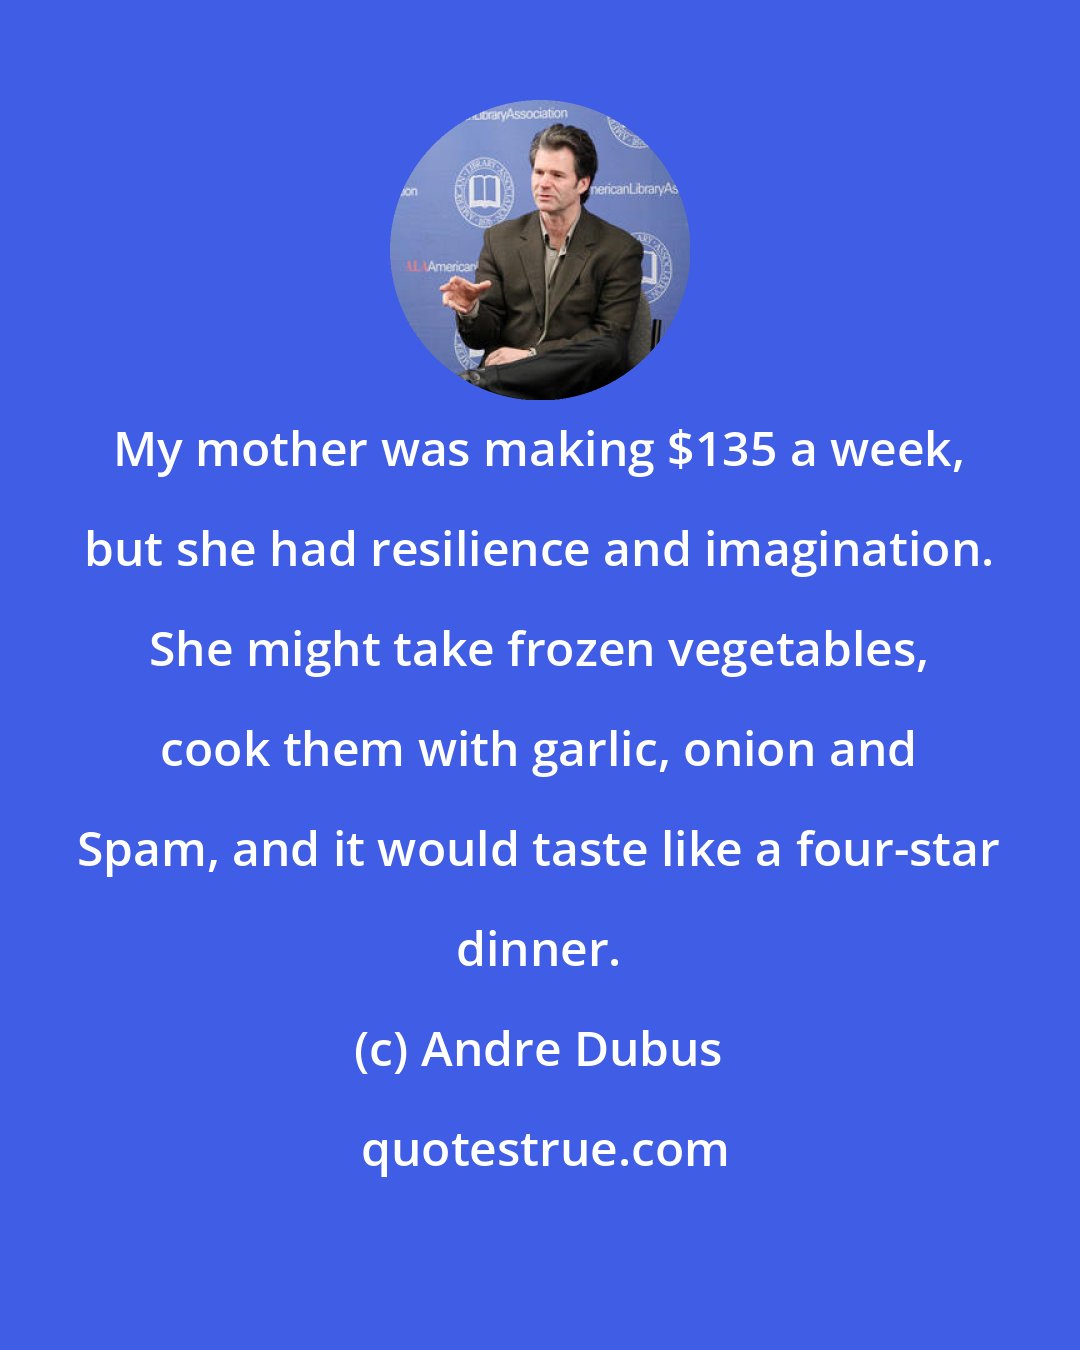 Andre Dubus: My mother was making $135 a week, but she had resilience and imagination. She might take frozen vegetables, cook them with garlic, onion and Spam, and it would taste like a four-star dinner.